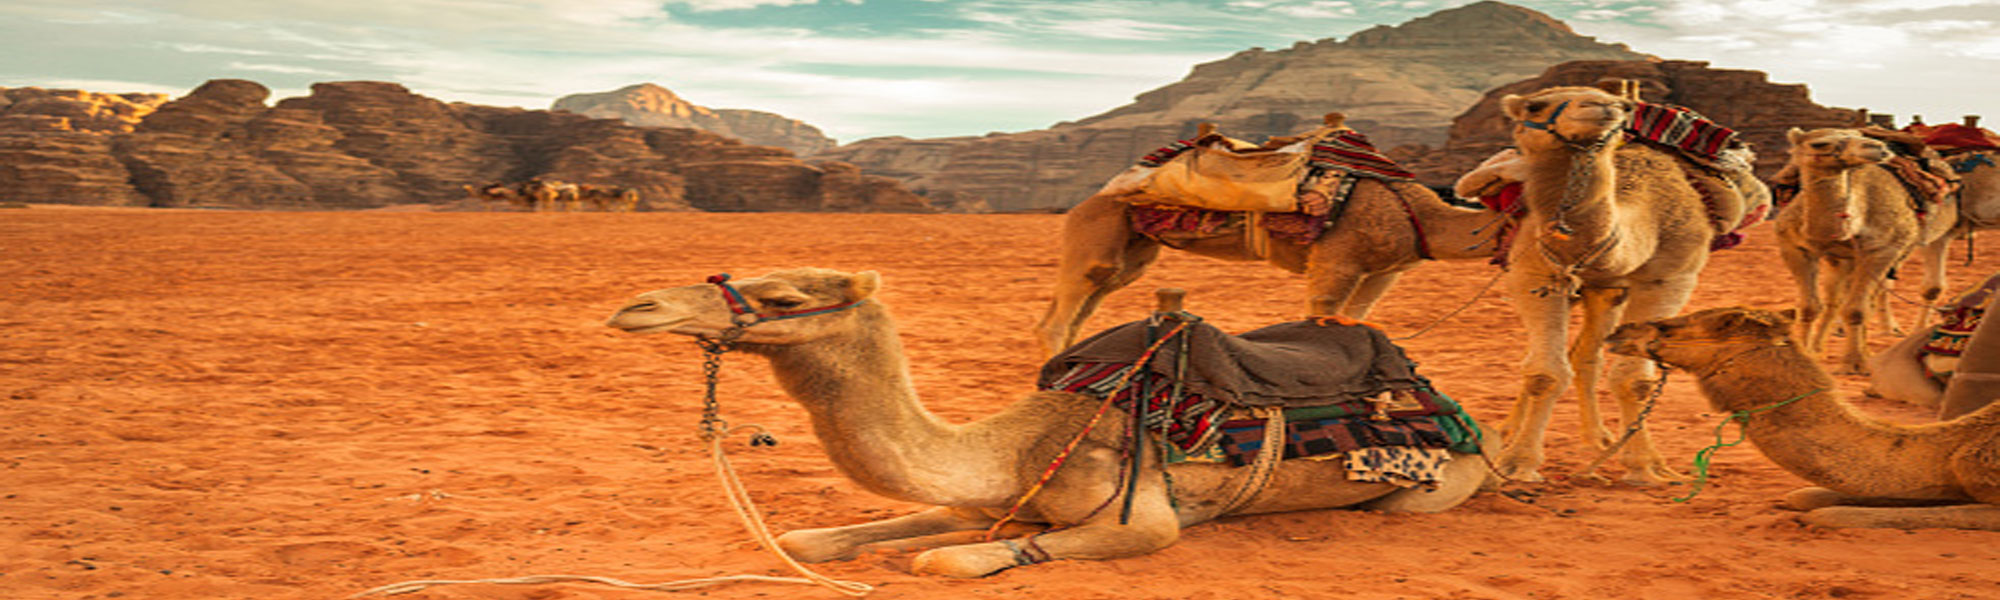 Golden Triangle Tours in India with Camel Safari Tours in Rajasthan